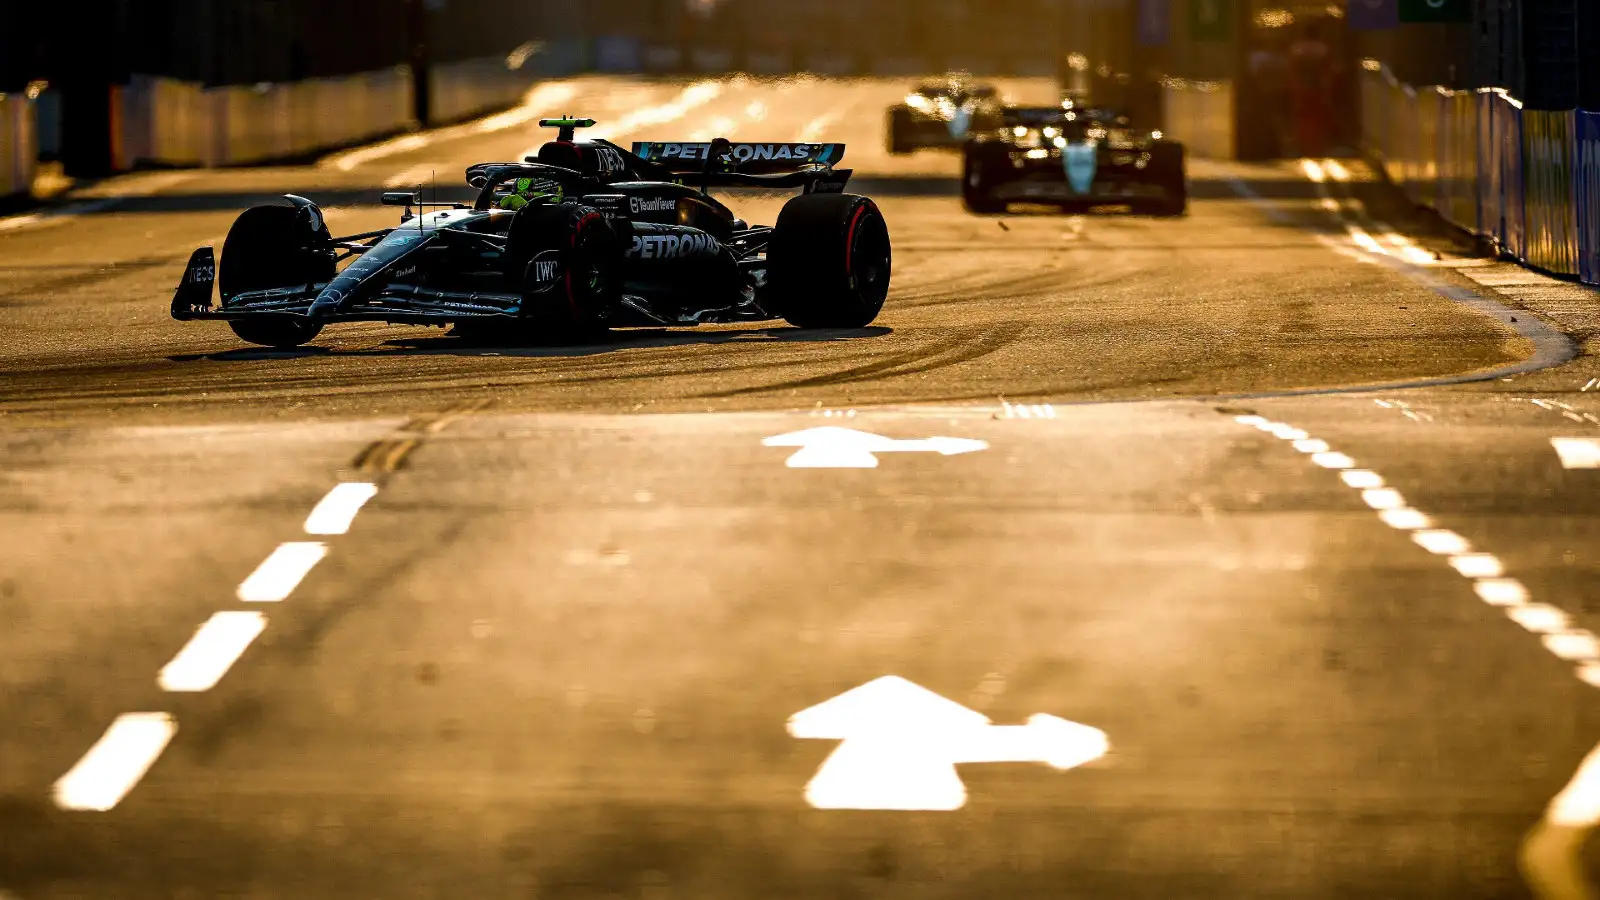 Mercedes' Lewis Hamilton driving during second practice at the Singapore Grand Prix.